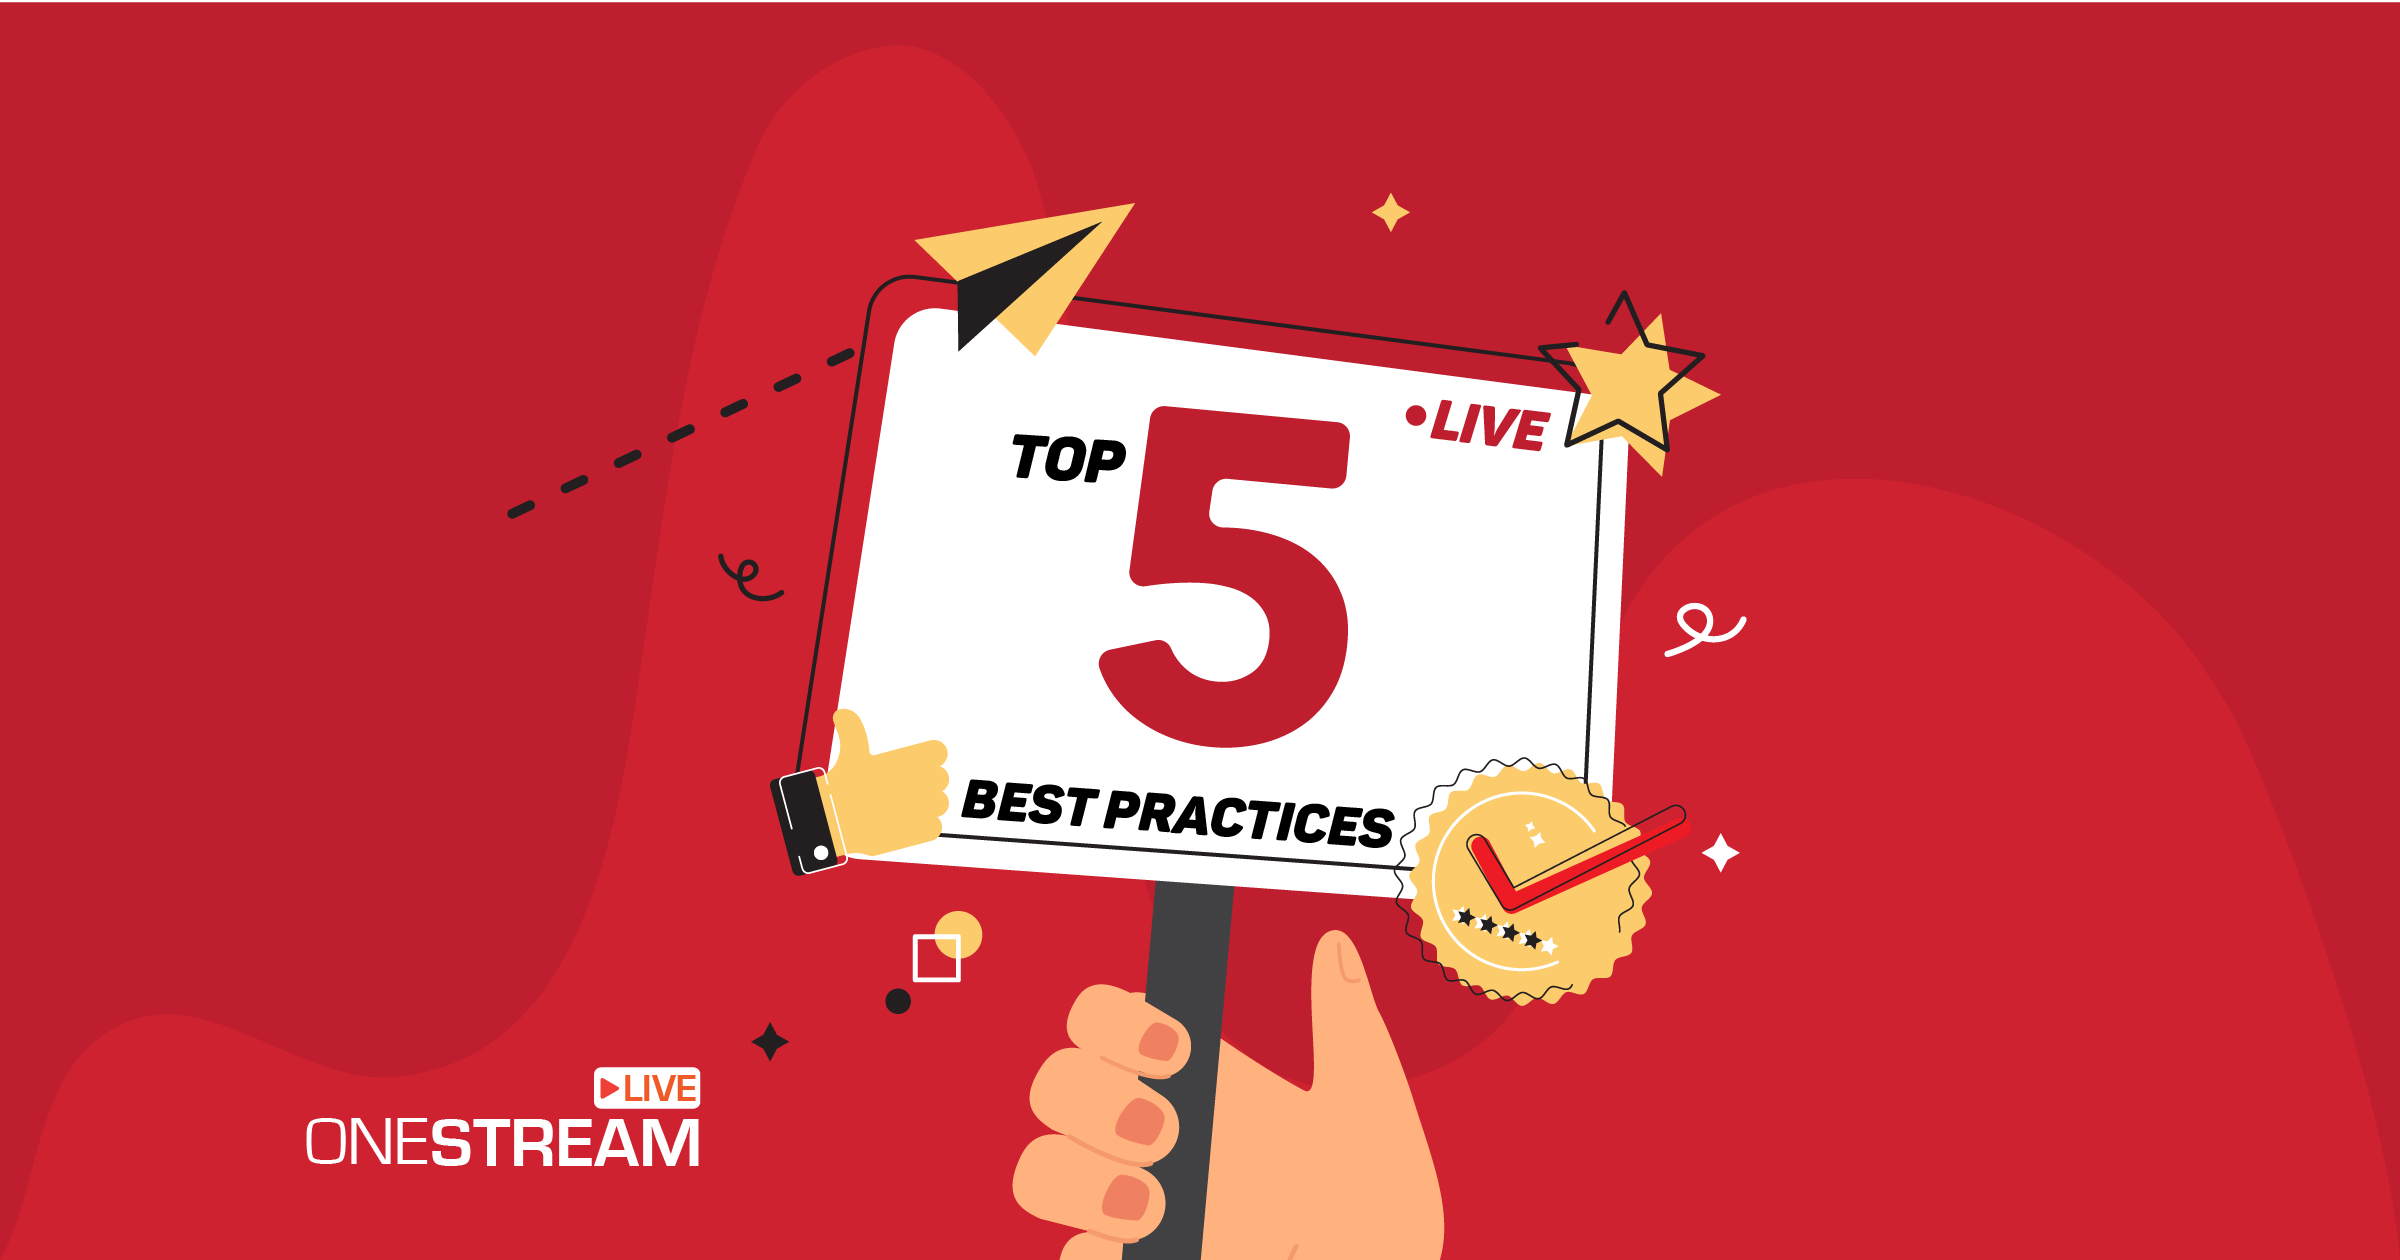 Top 5 live streaming best practices in 2021